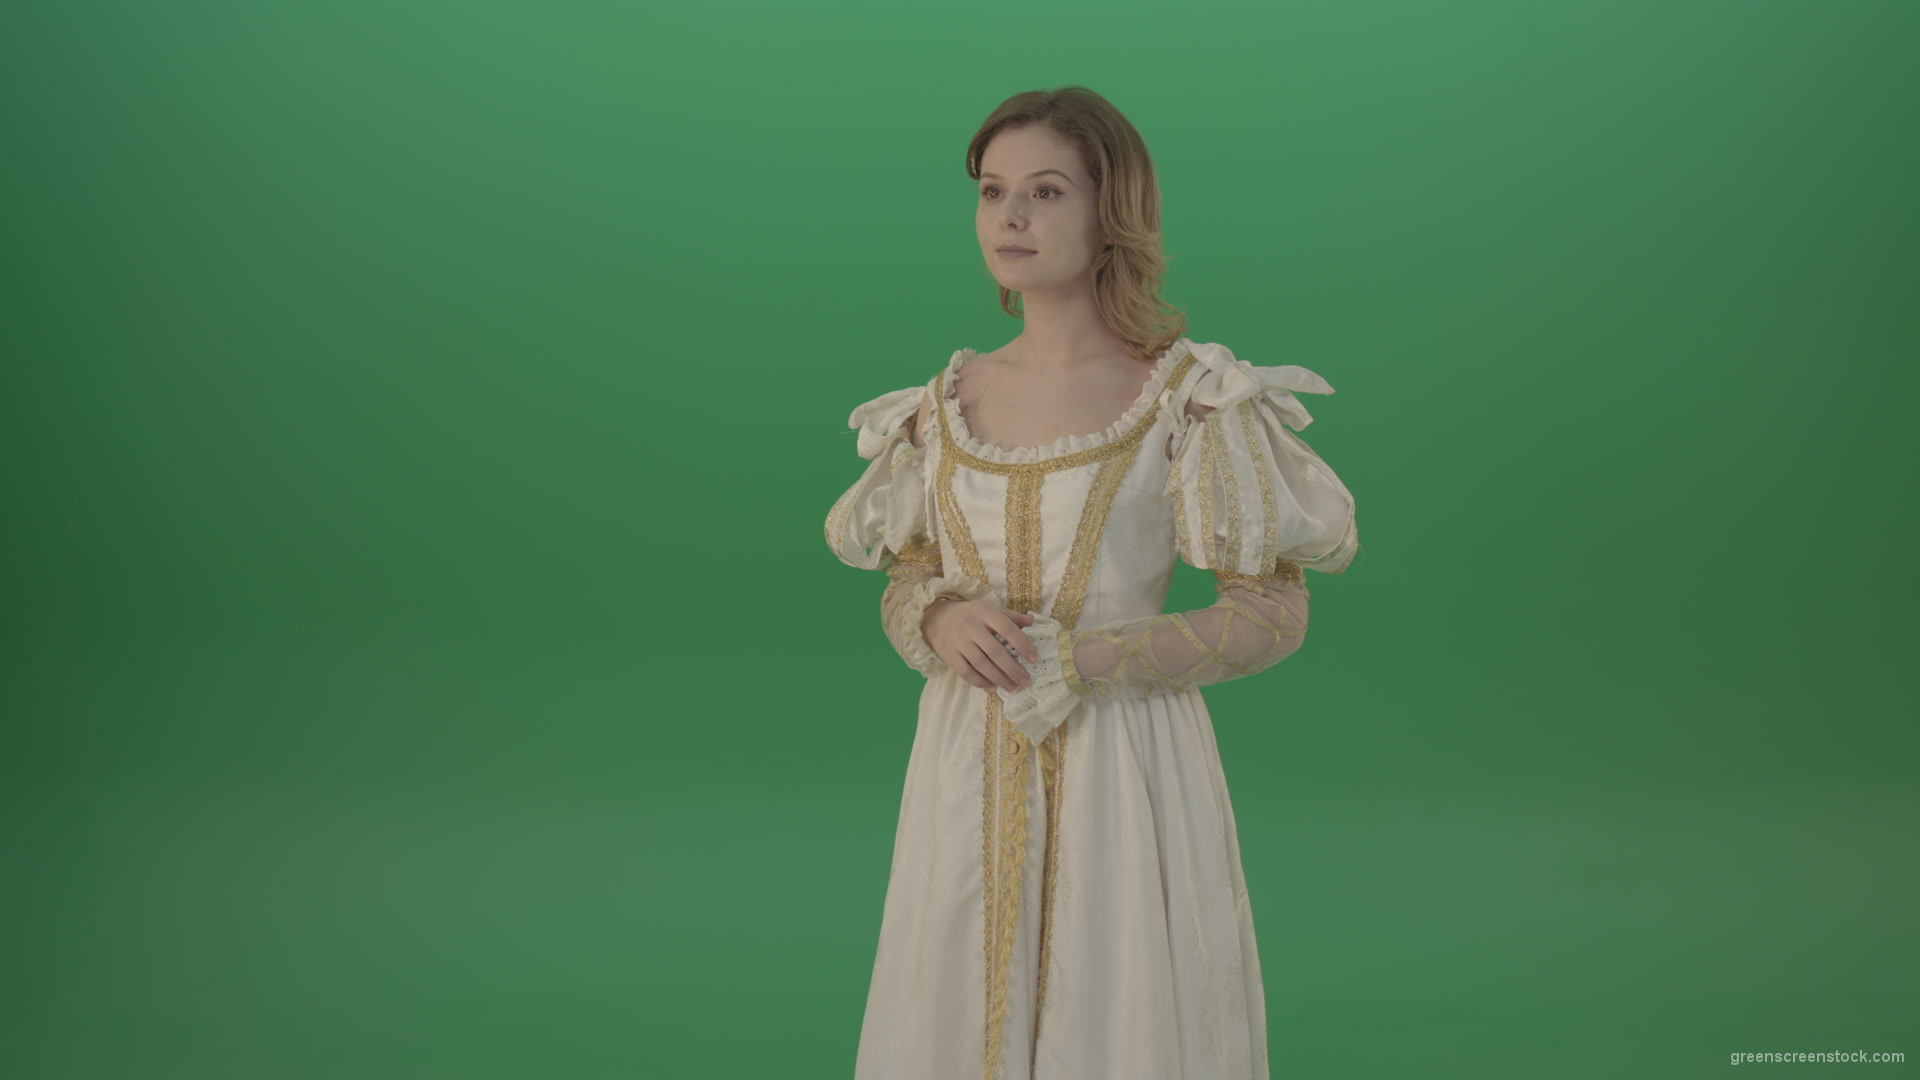 Flipping-a-virtual-reality-screen-the-girl-gladly-looks-at-the-photo-isolated-on-green-screen_001 Green Screen Stock